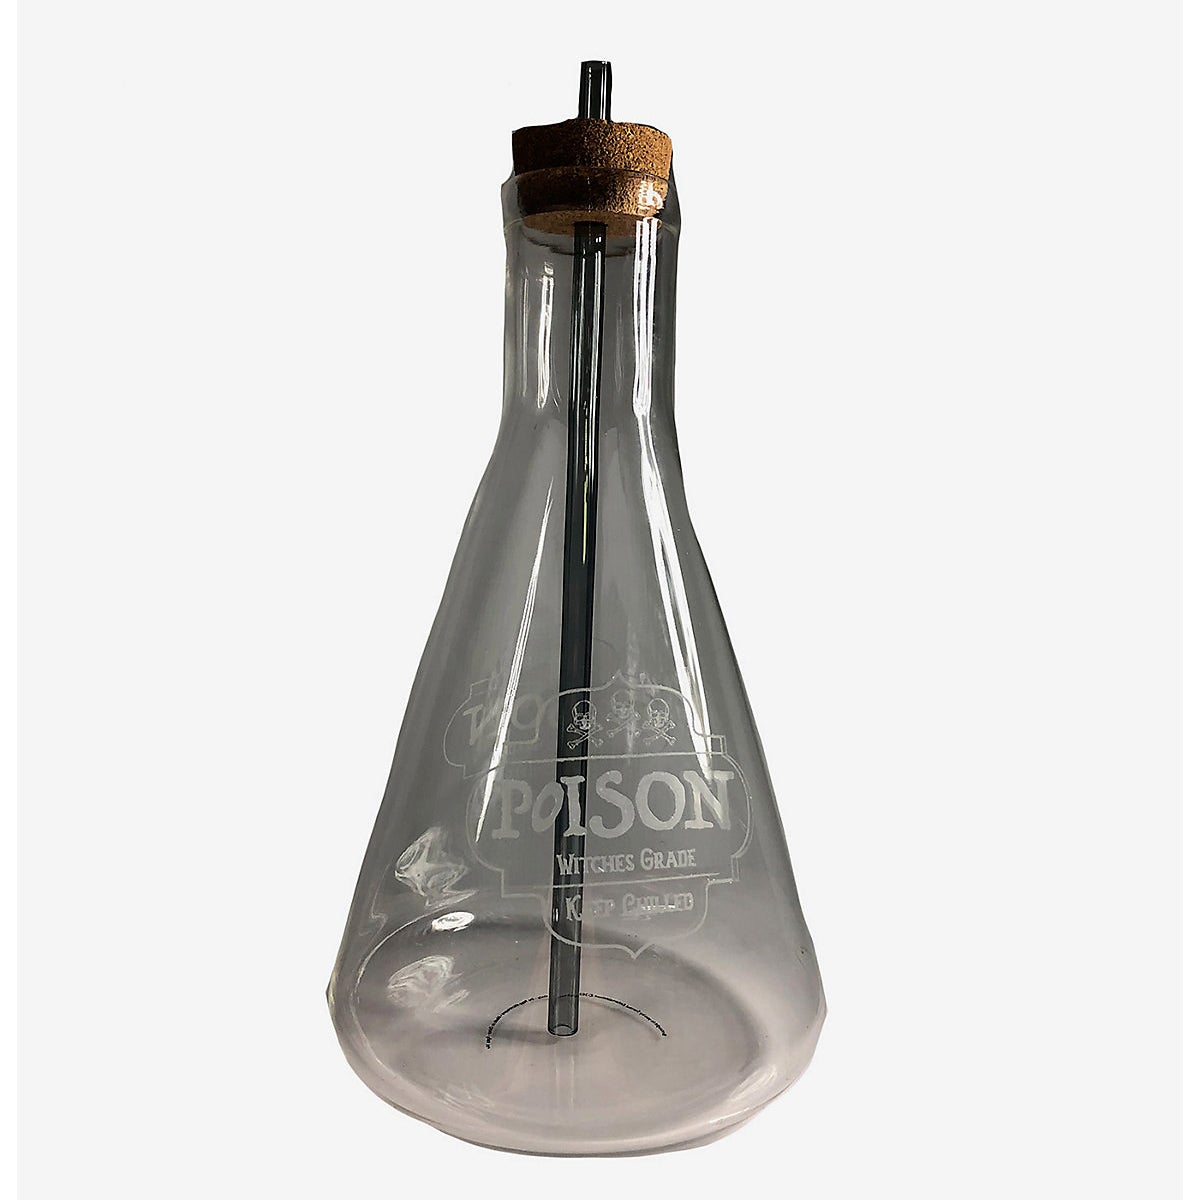 The water bottle shapes like a chemistry flask with straw and cork stopper